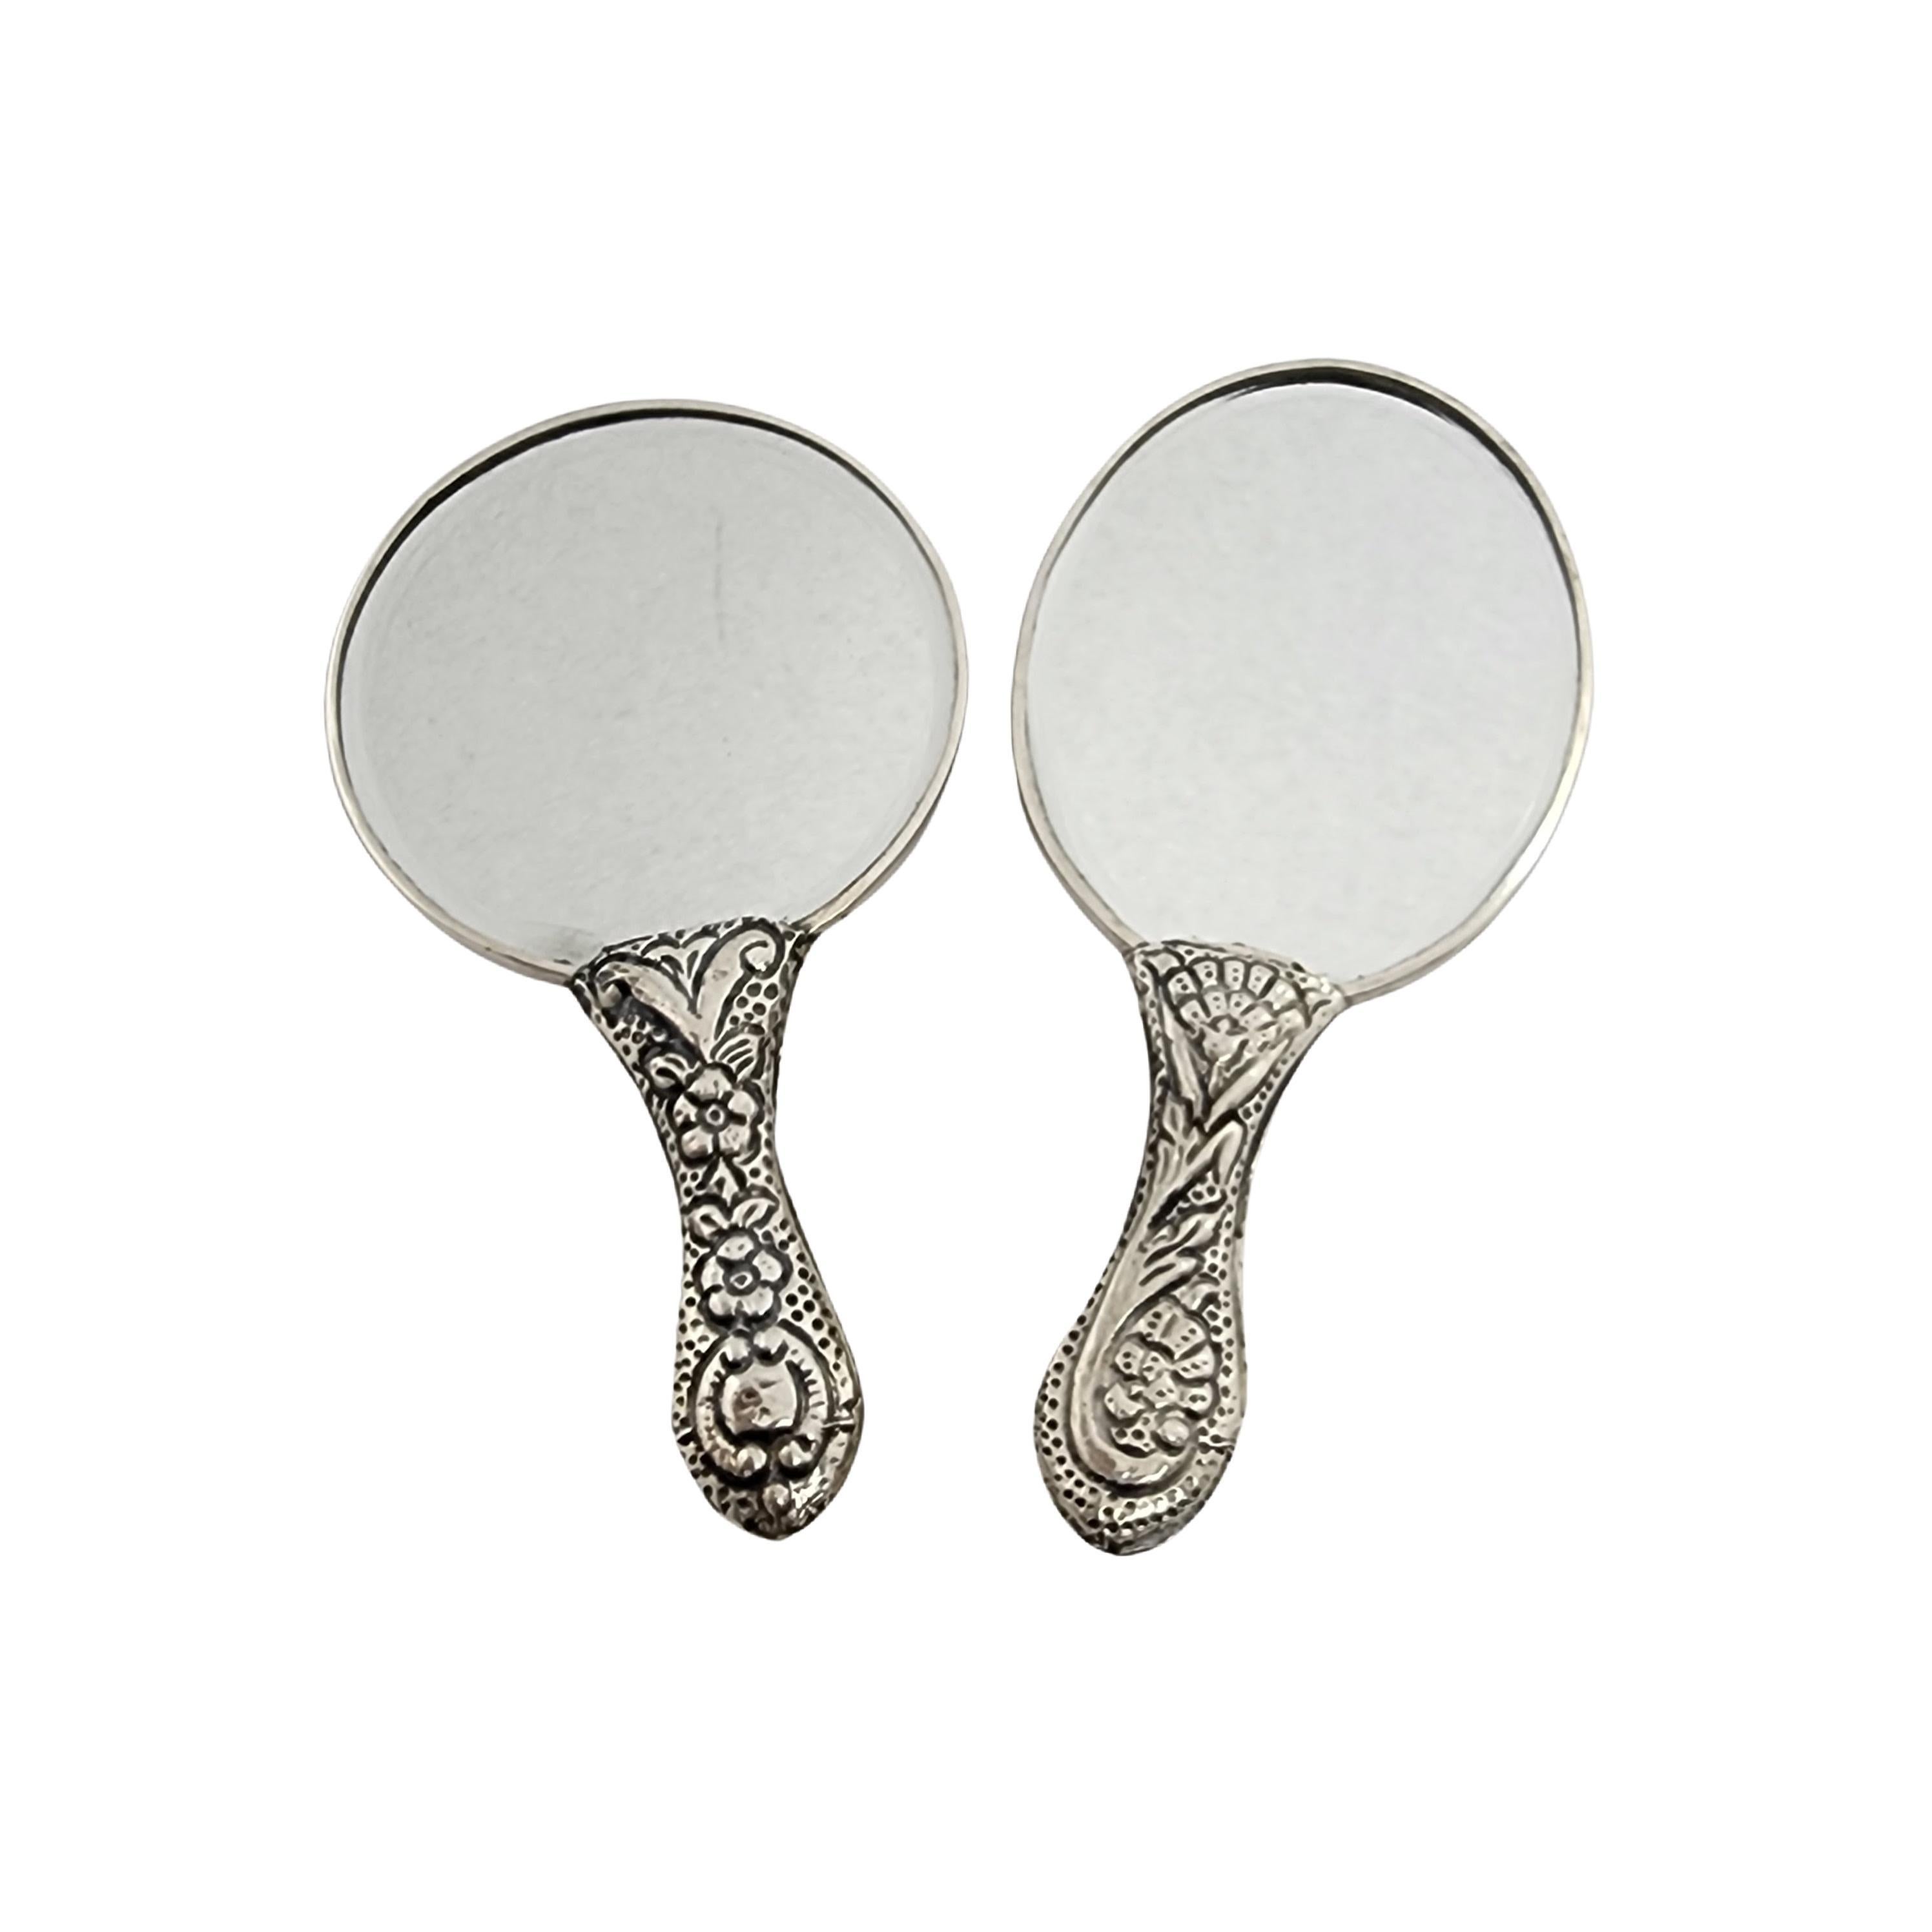 Set of 2 900 silver repousse hand mirrors by Turan of Turkey.

2 small hand mirrors in a floral repousse design. One features a round mirror, the other features an oval mirror.

Oval hand mirror measures approx 5 1/8